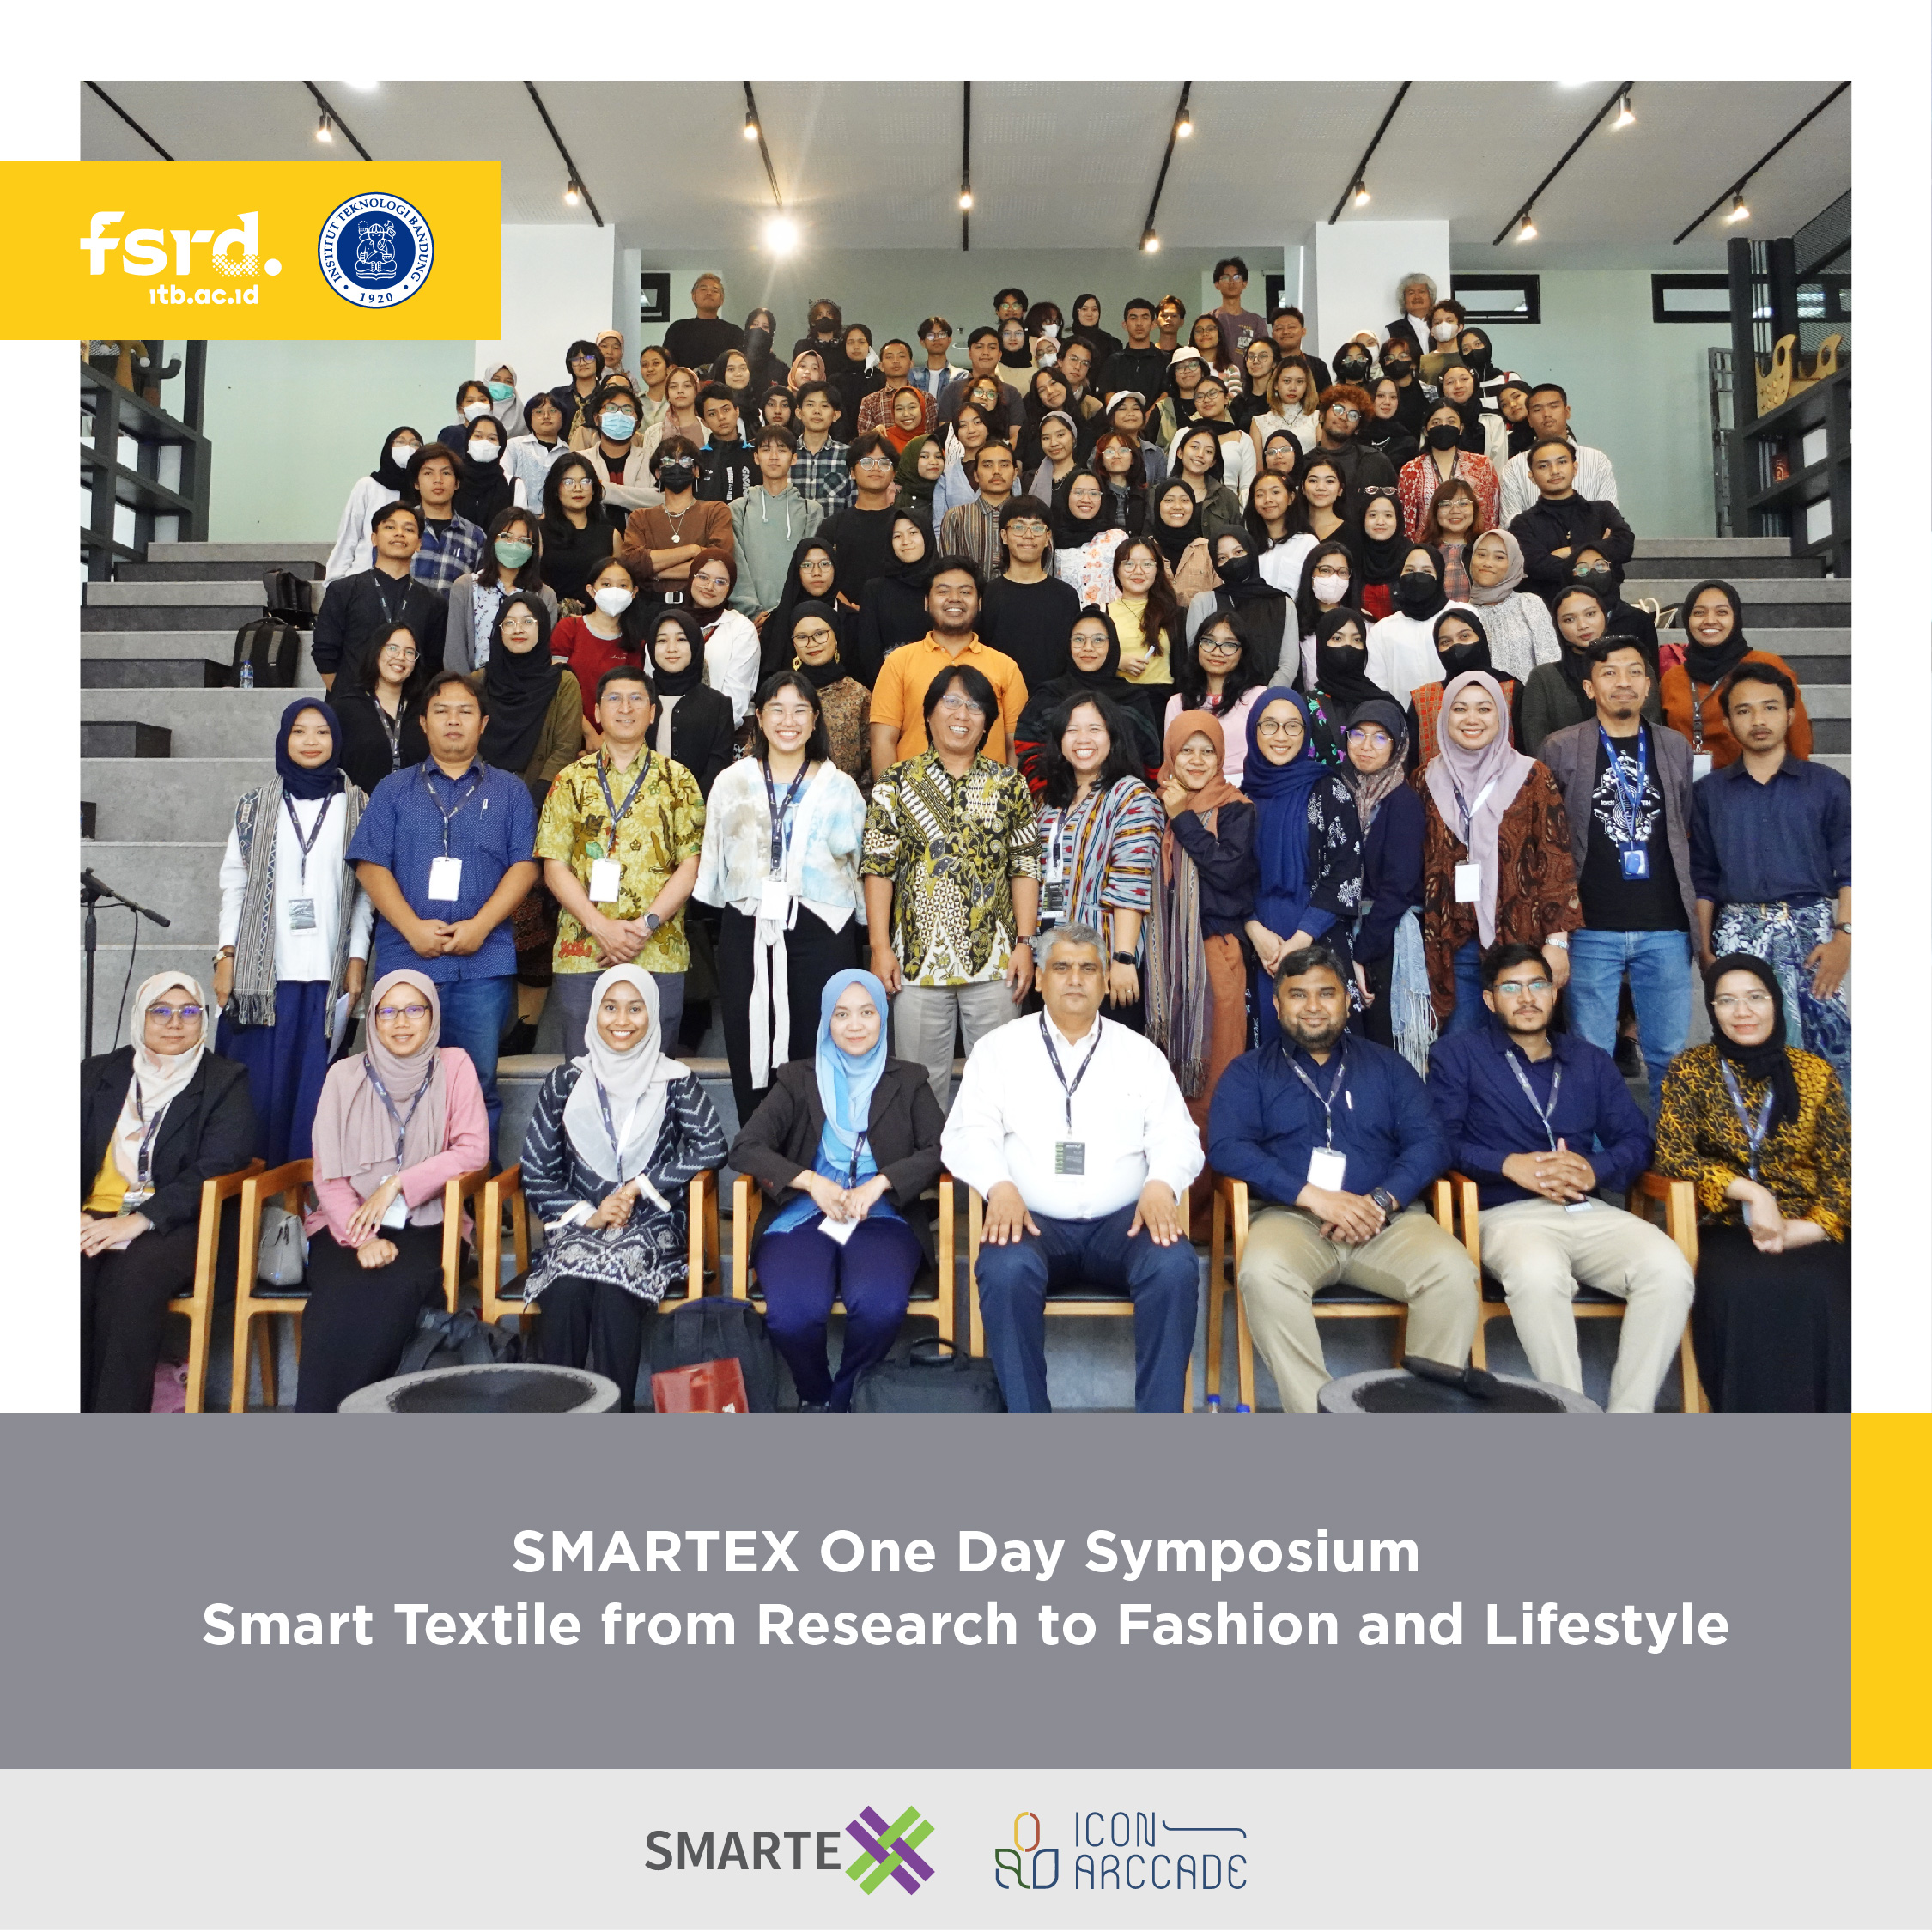 SMARTEX One Day Symposium “Smart Textile from Research to Fashion and Lifestyle”